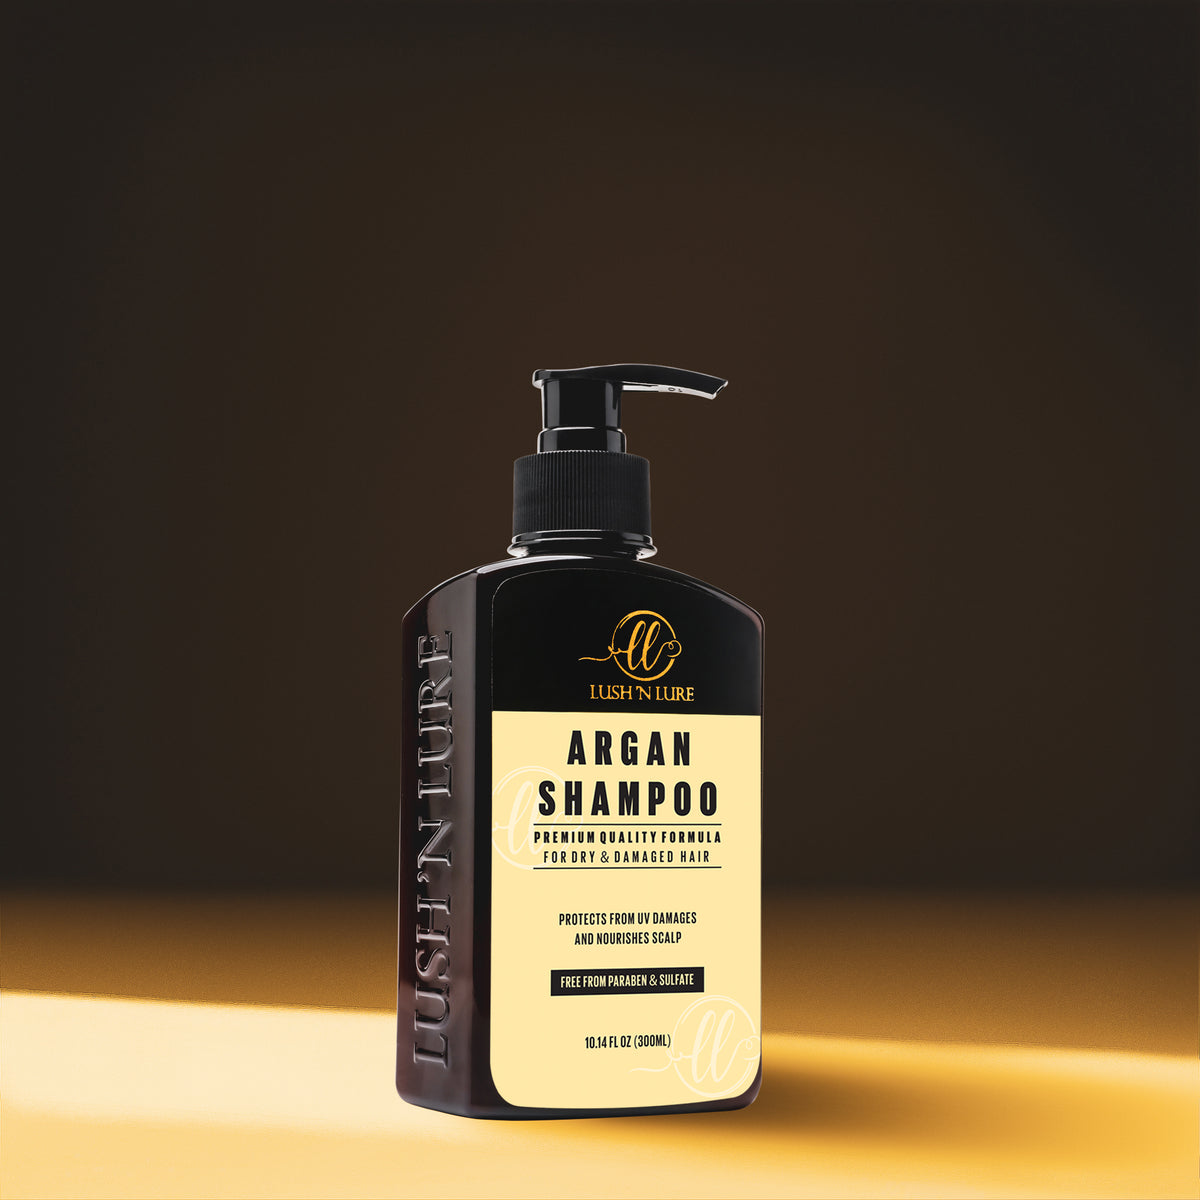 "Image displaying LUSH 'N LURE Sulfate & Paraben Free Argan Shampoo, a nourishing formula enriched with argan oil for silky, healthy-looking hair."